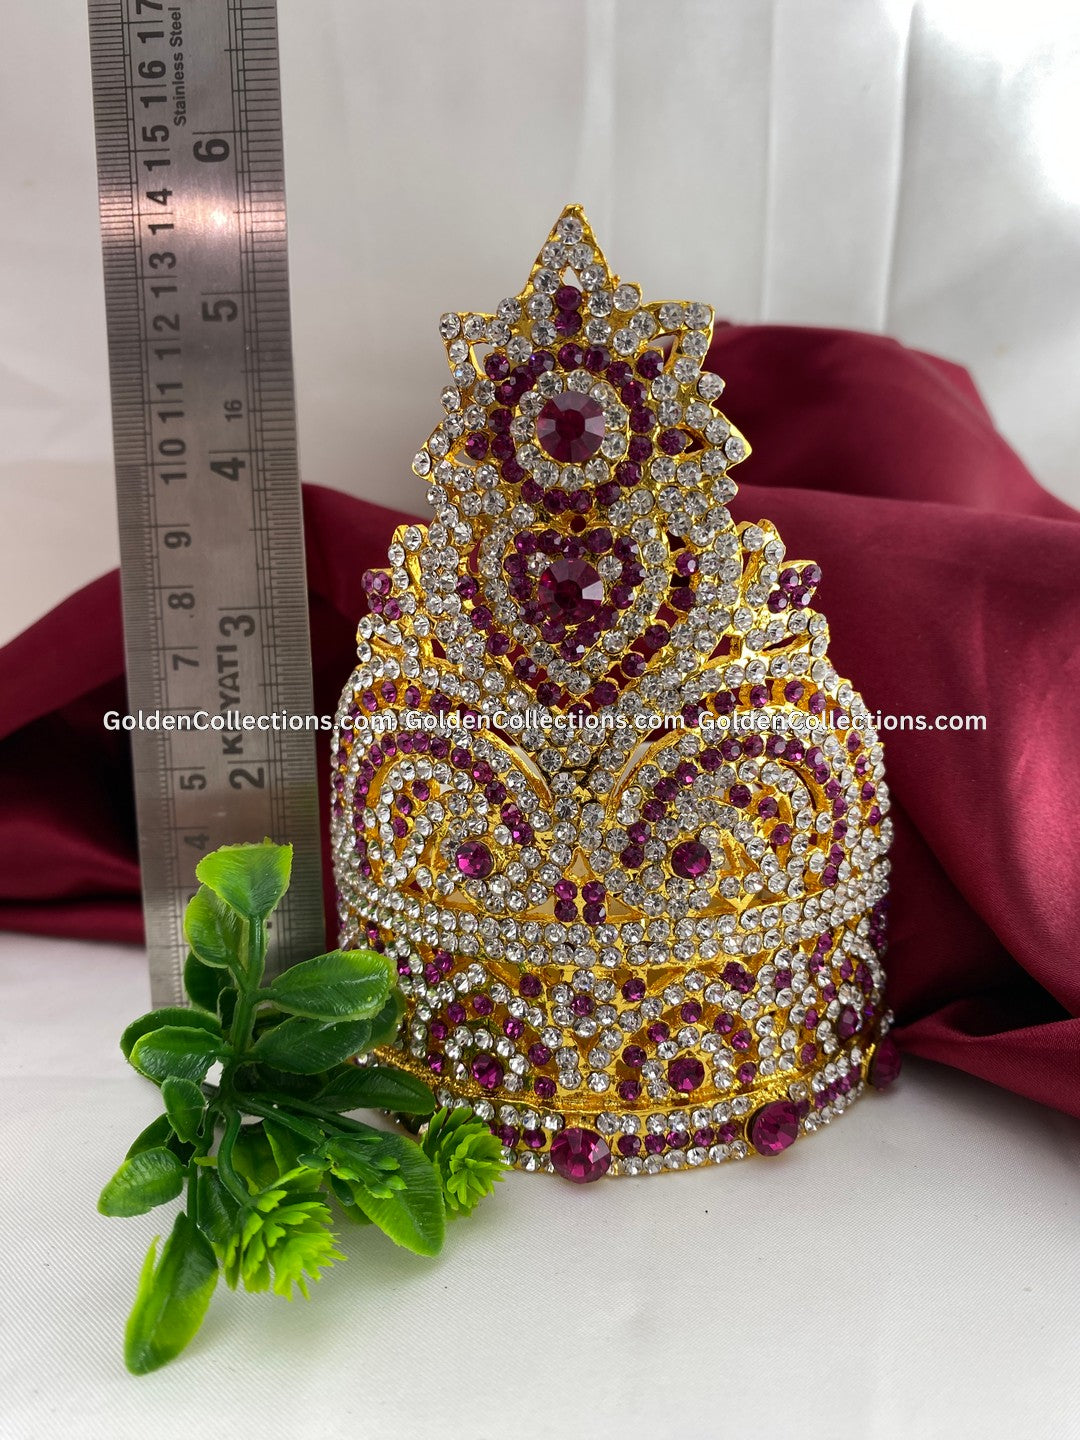 Regal Jeweled Crown - GoldenCollections DGC-053 2